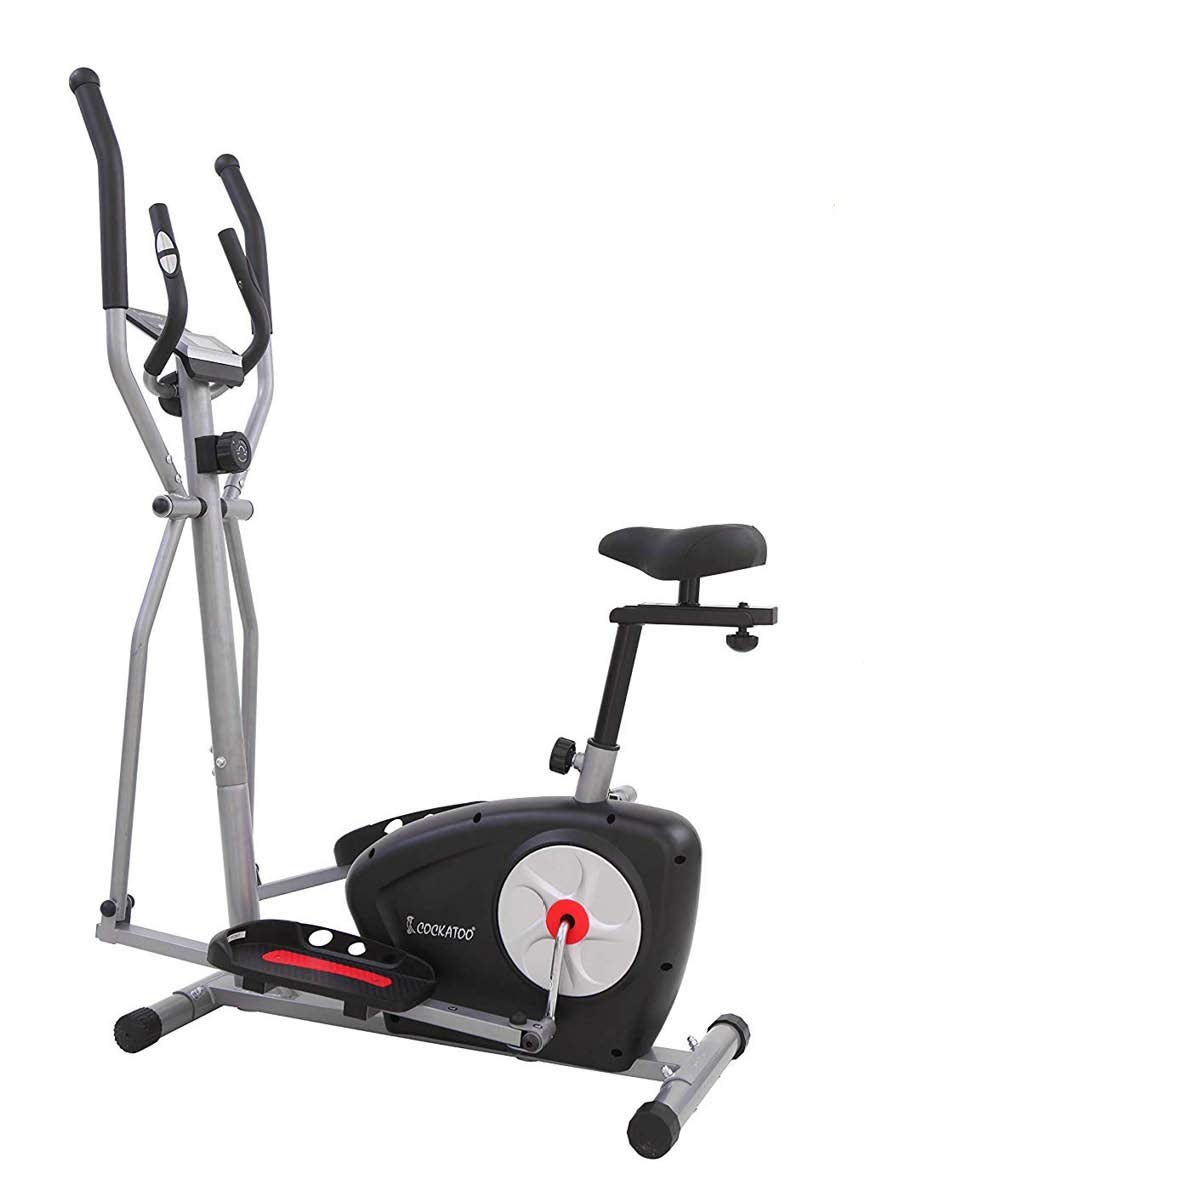 COCKATOO CE03ADVANCE review- best elliptical cross trainer for home